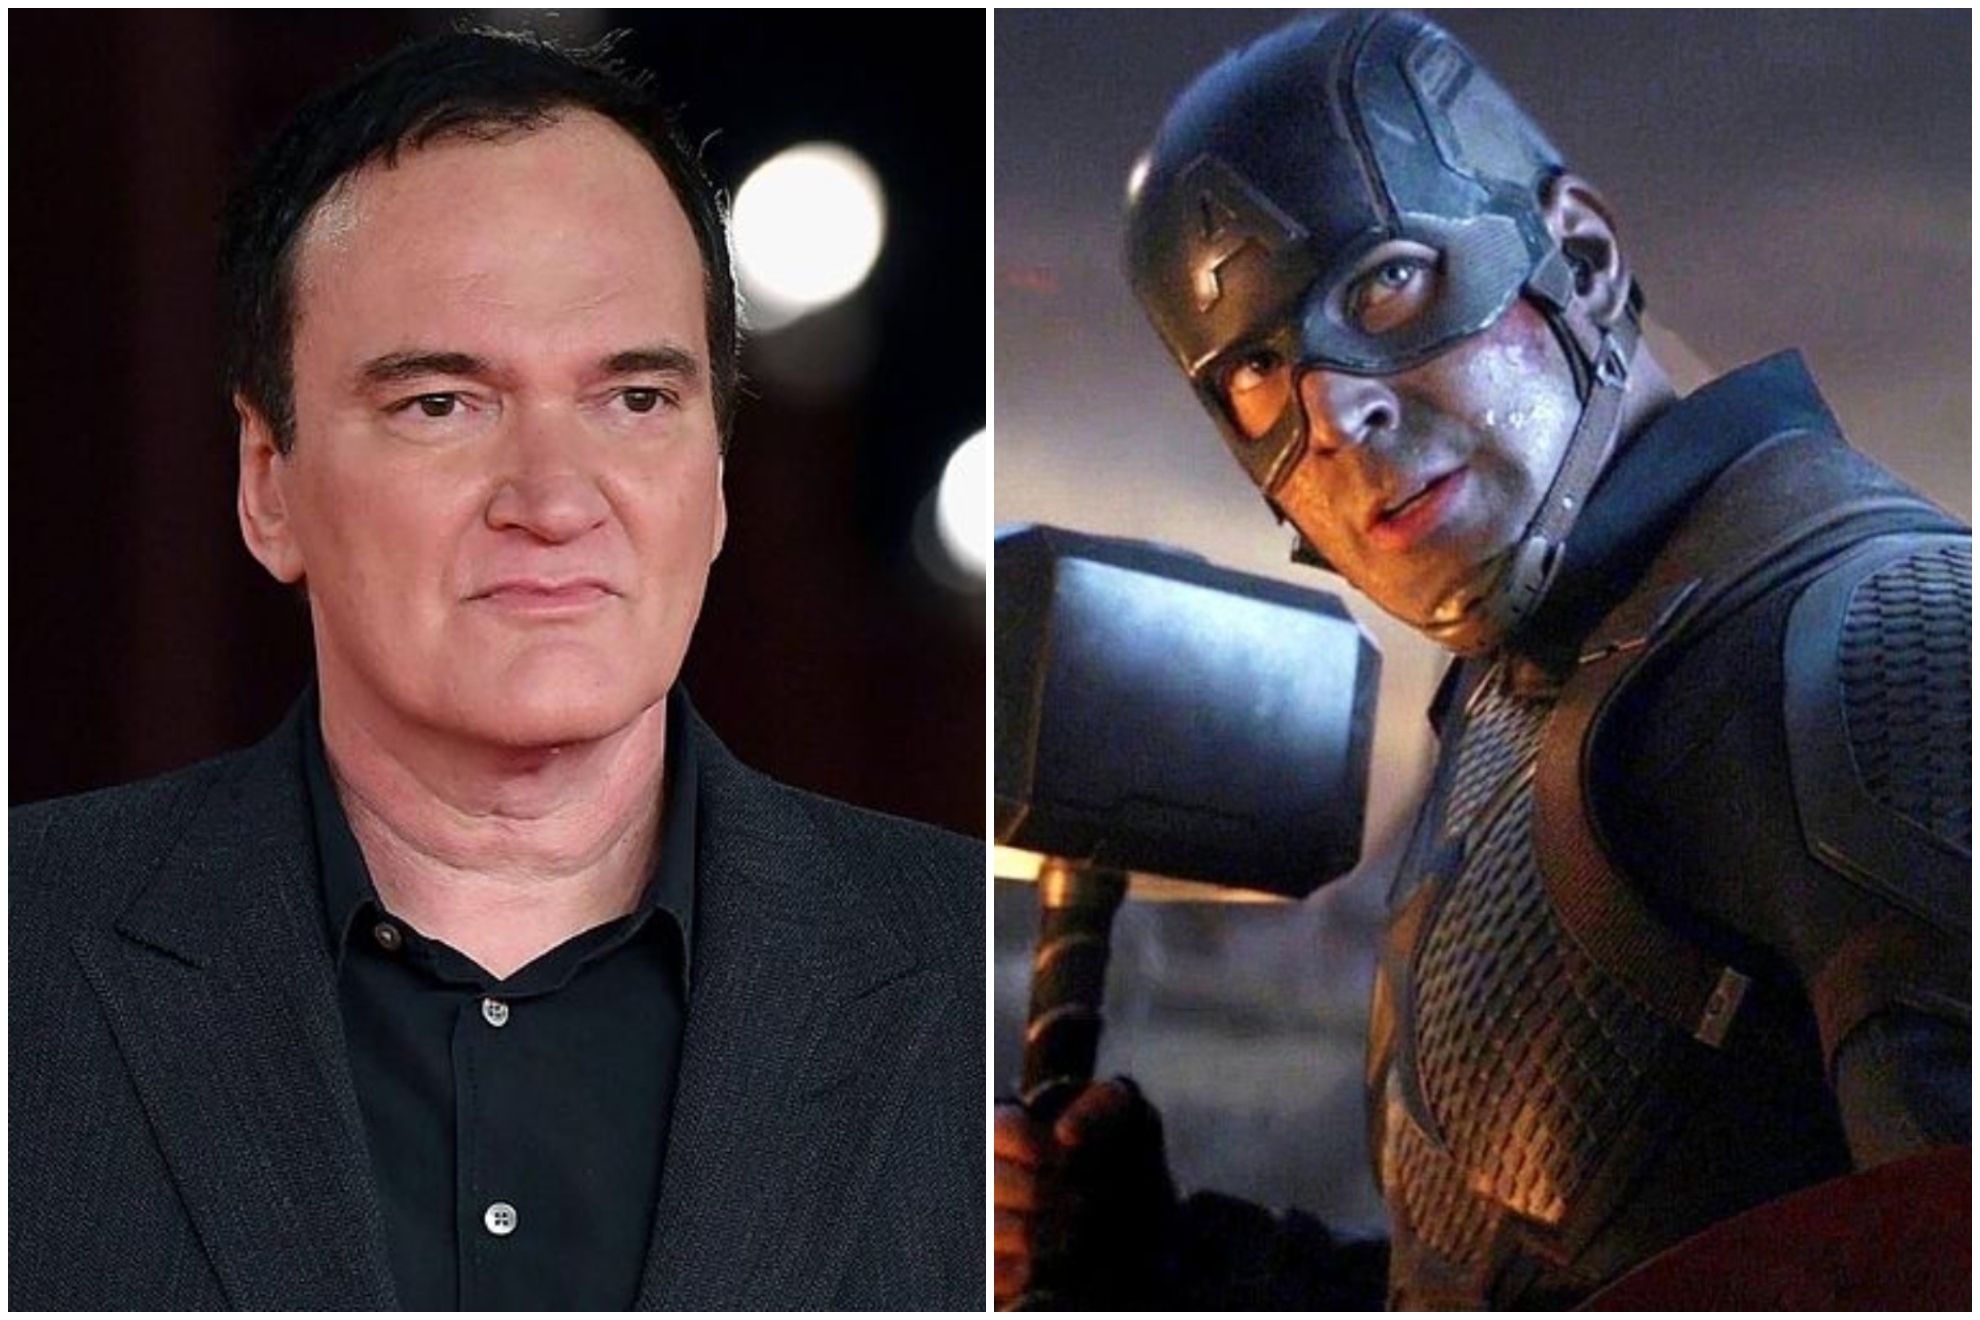 Tarantino's biggest criticism of Marvel movies that Chris Evans sees as a positive: He's right